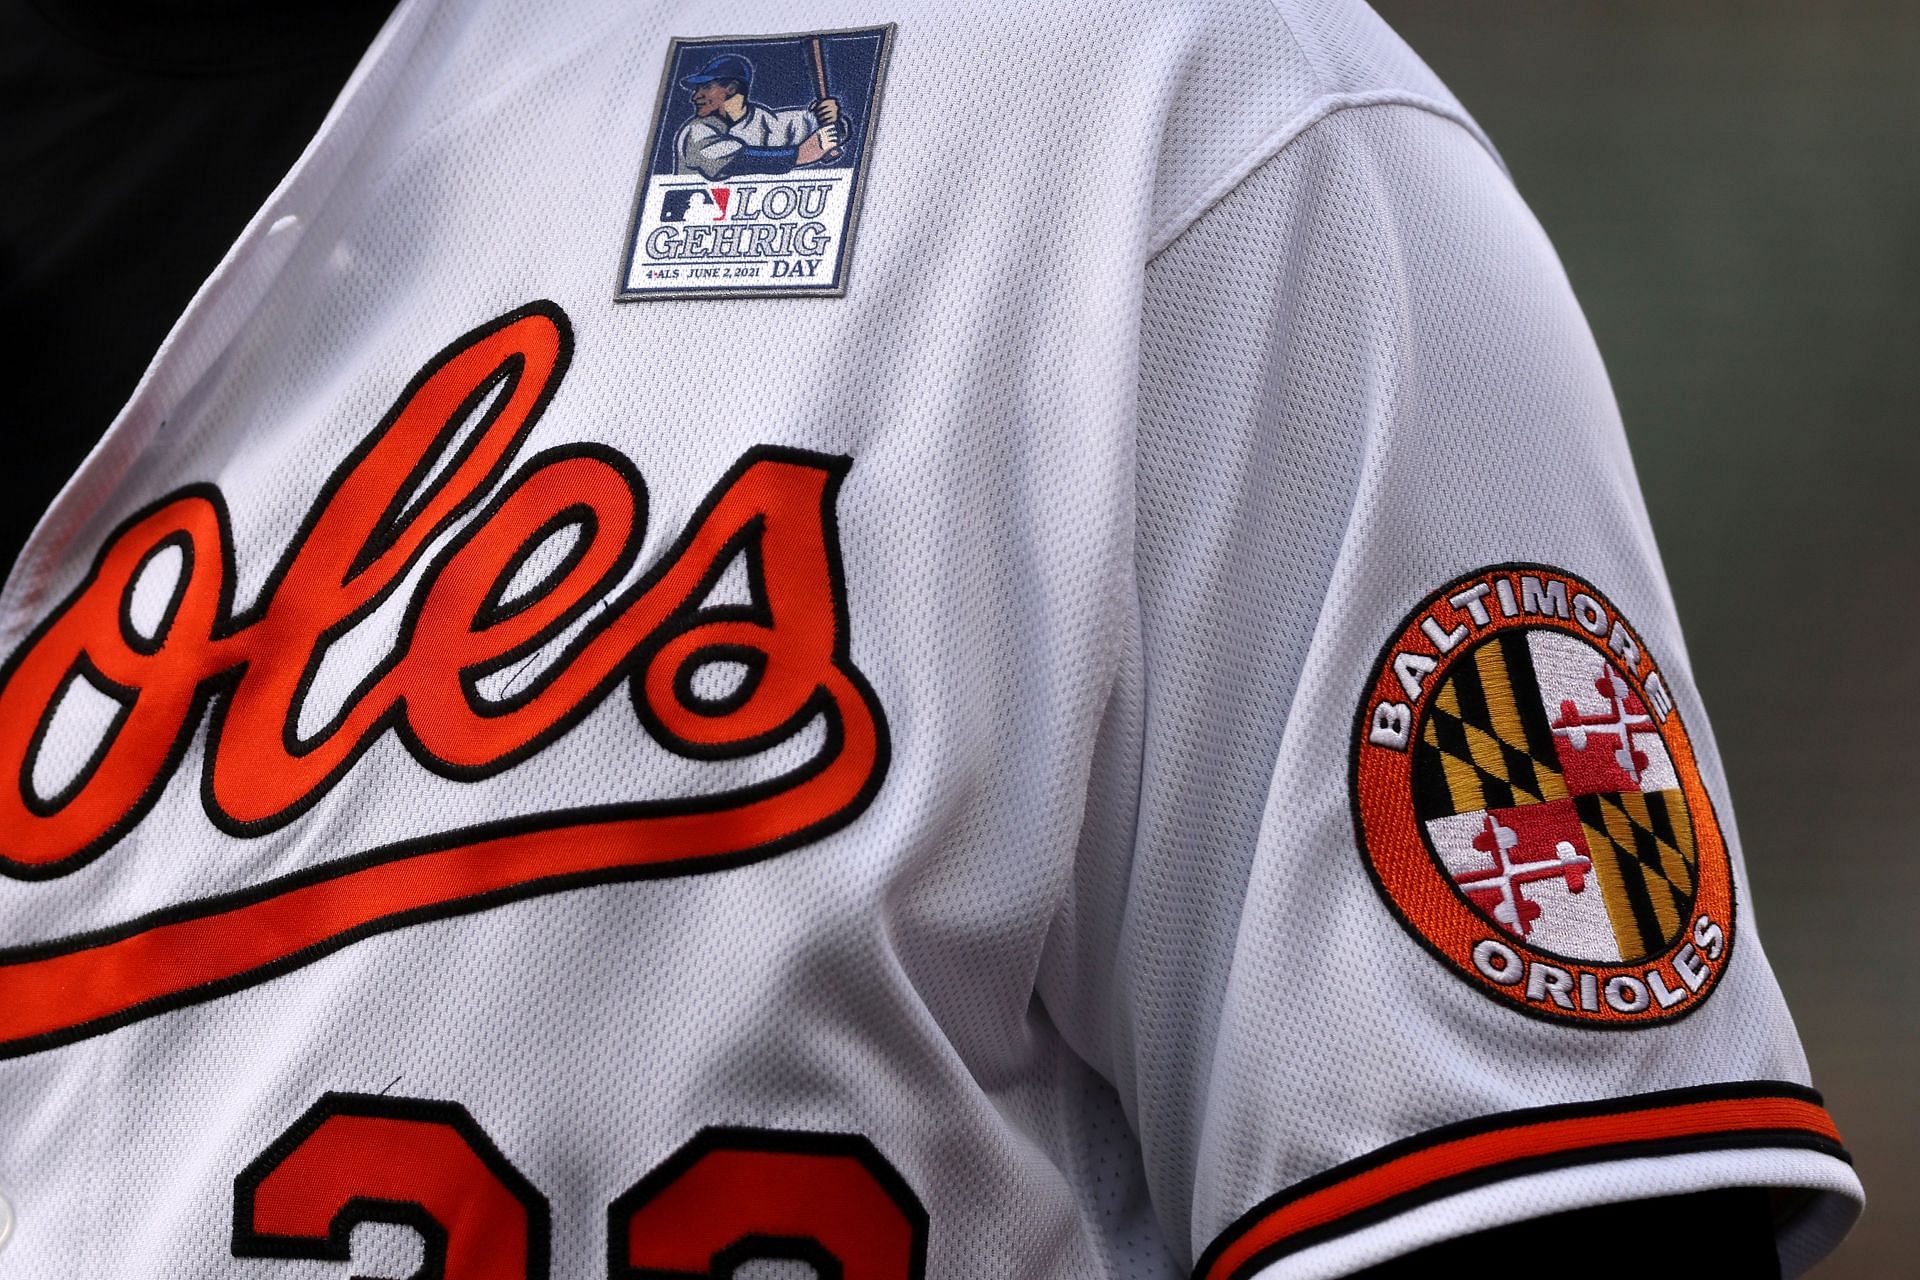 Baltimore Orioles - This is what it means to wear Baltimore on your chest.